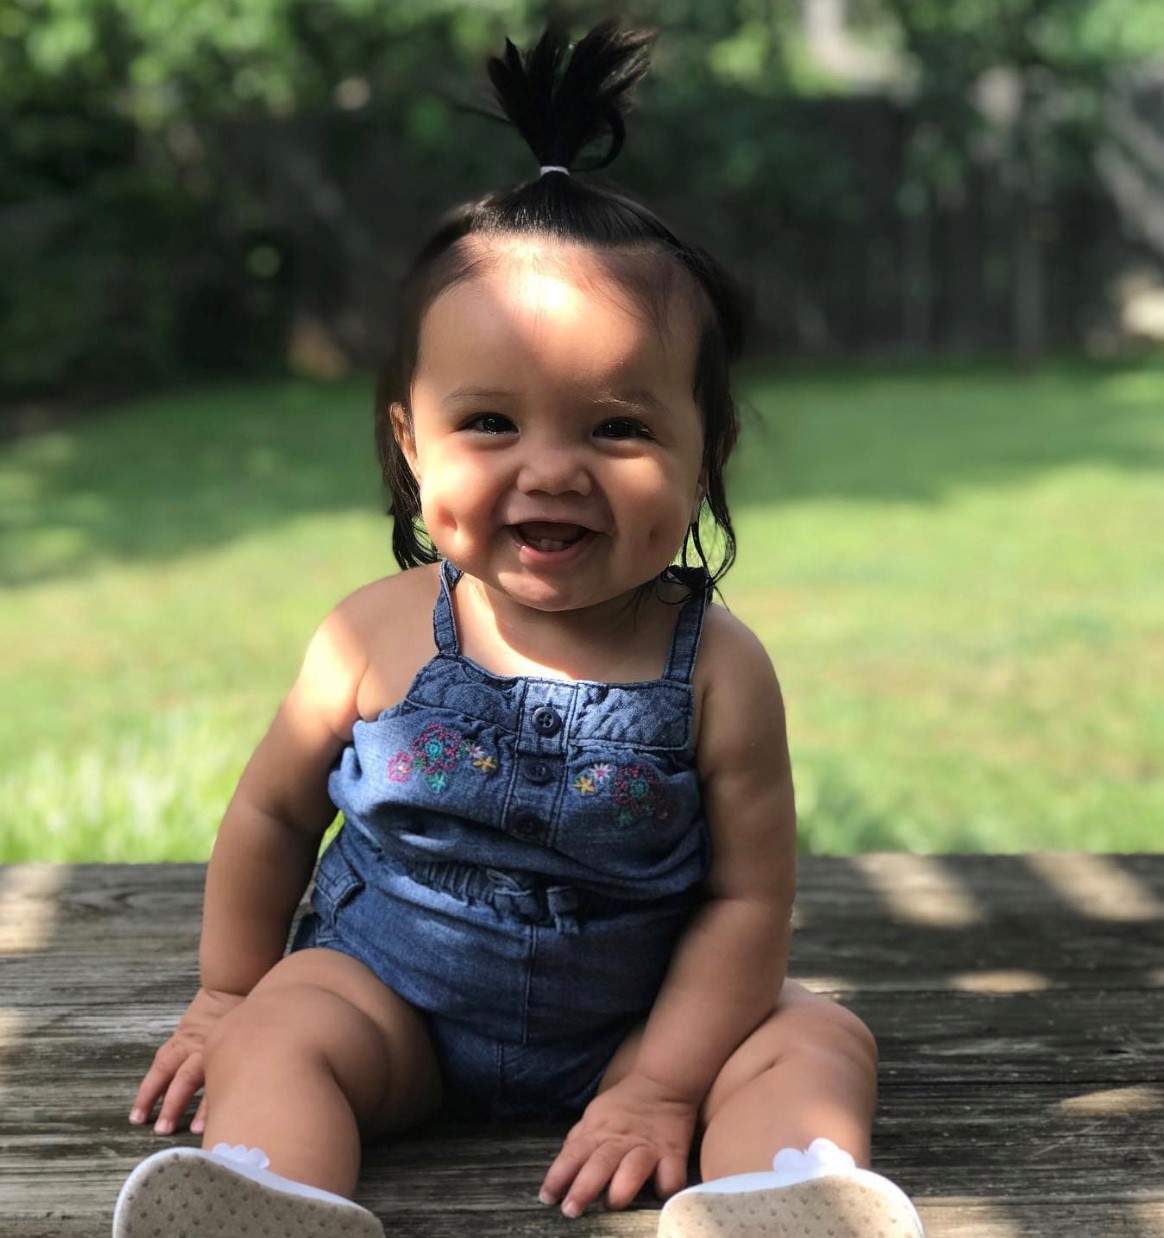 Smiling baby girl in overalls sitting on a picnic table under the shade of a tree.